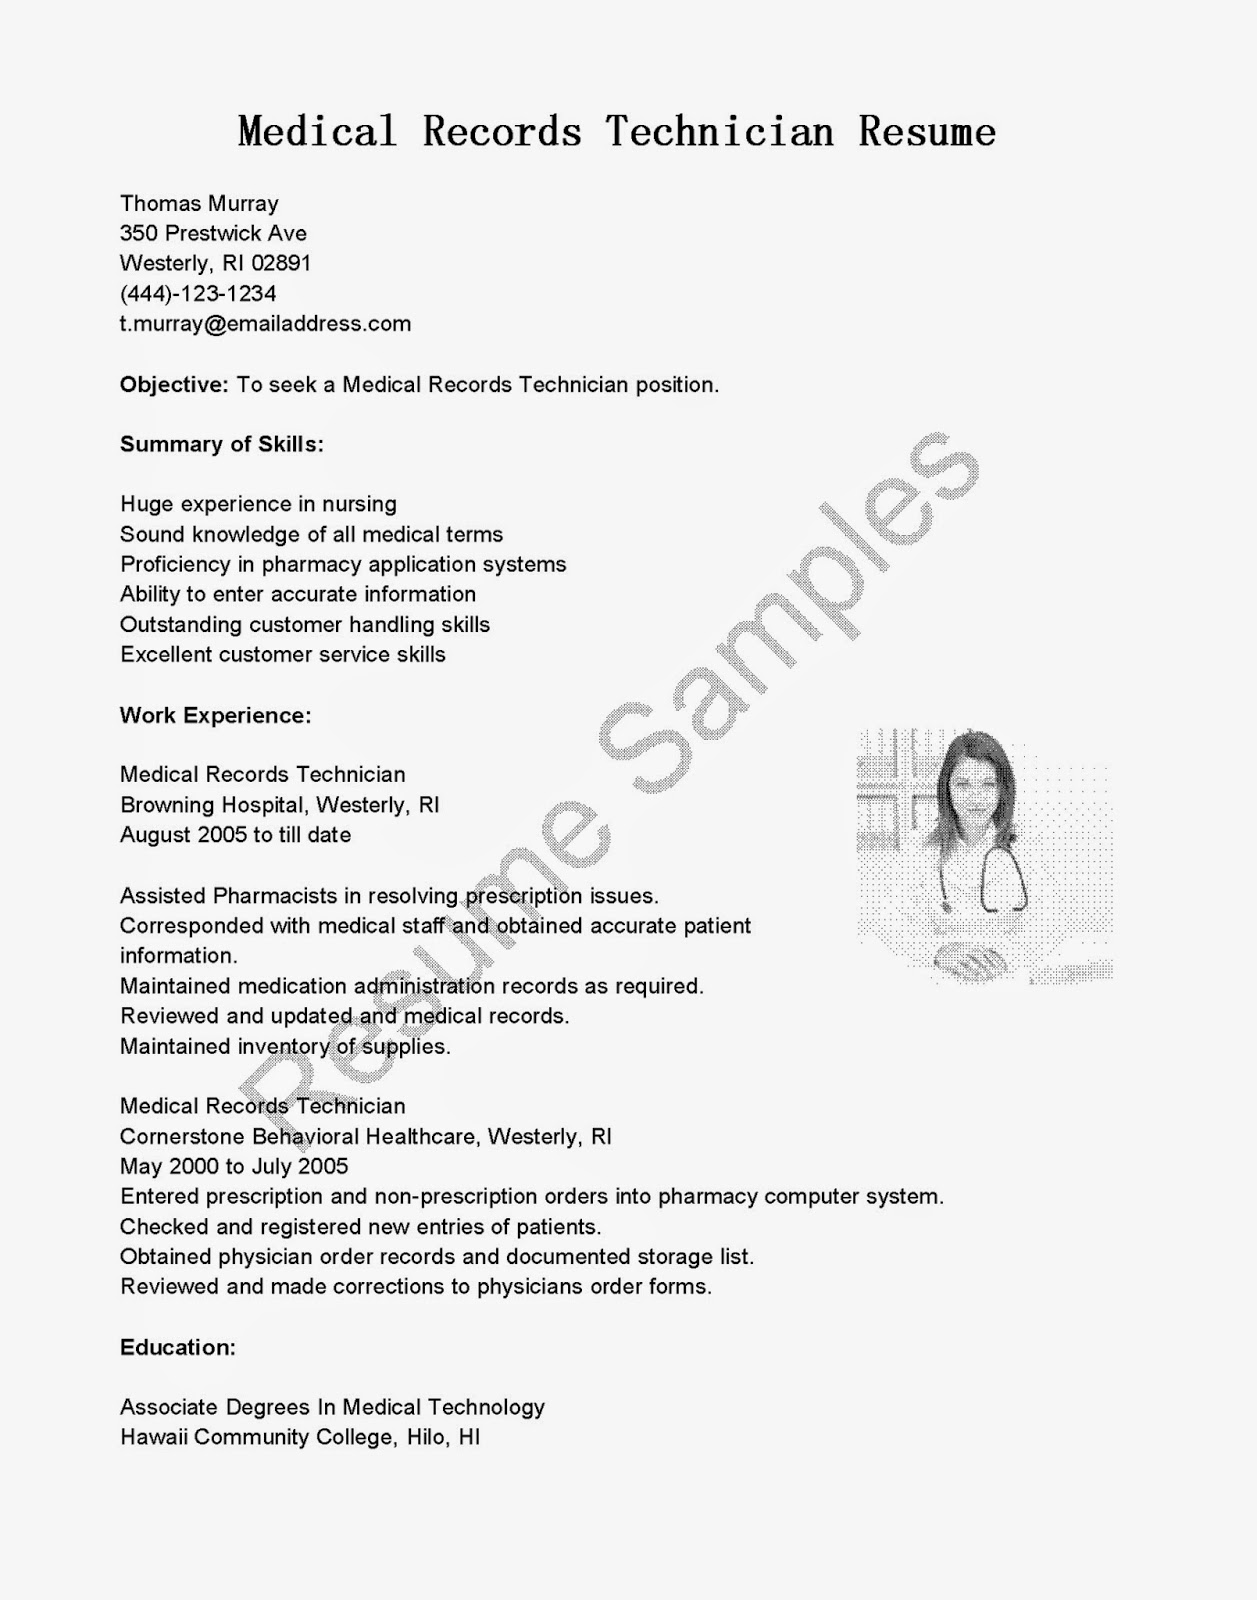 Payroll specialist resume template